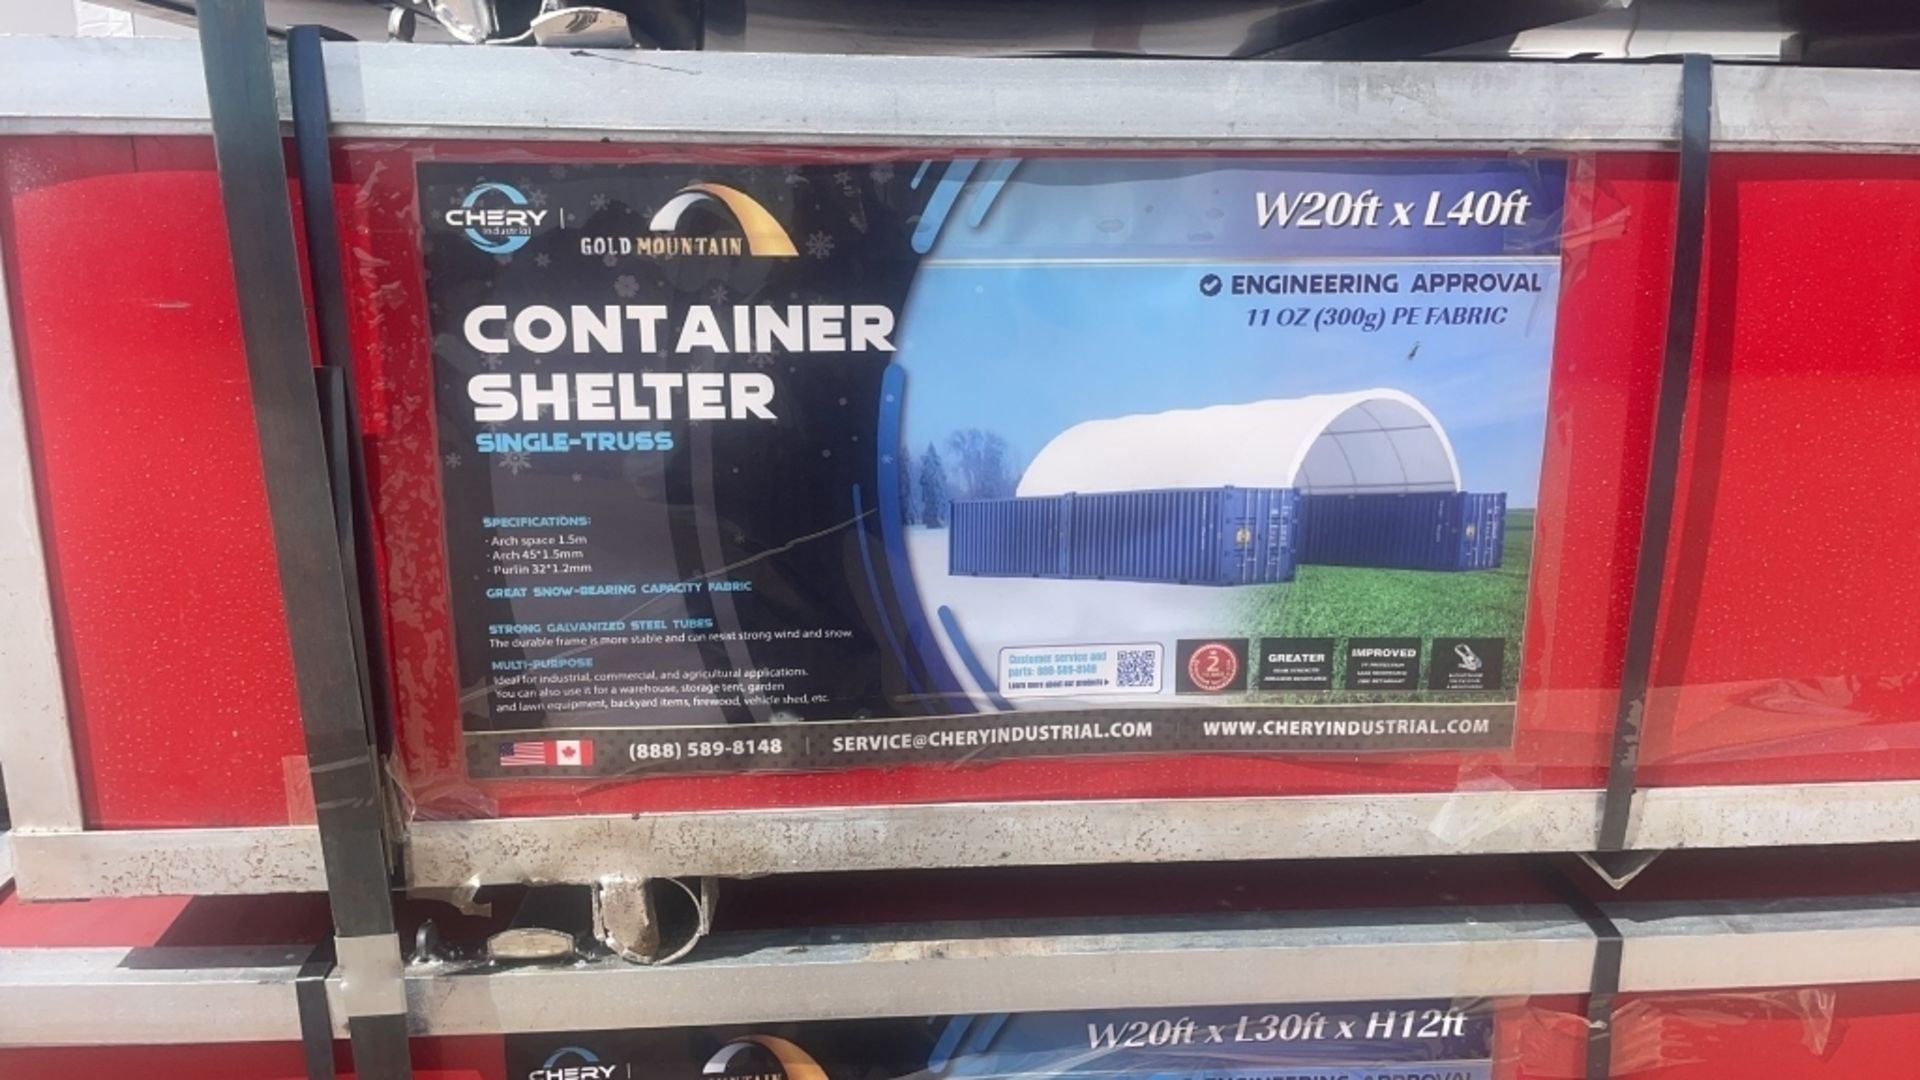 Unused 20x40 Dome Container Shelter in broken box - Image 2 of 6